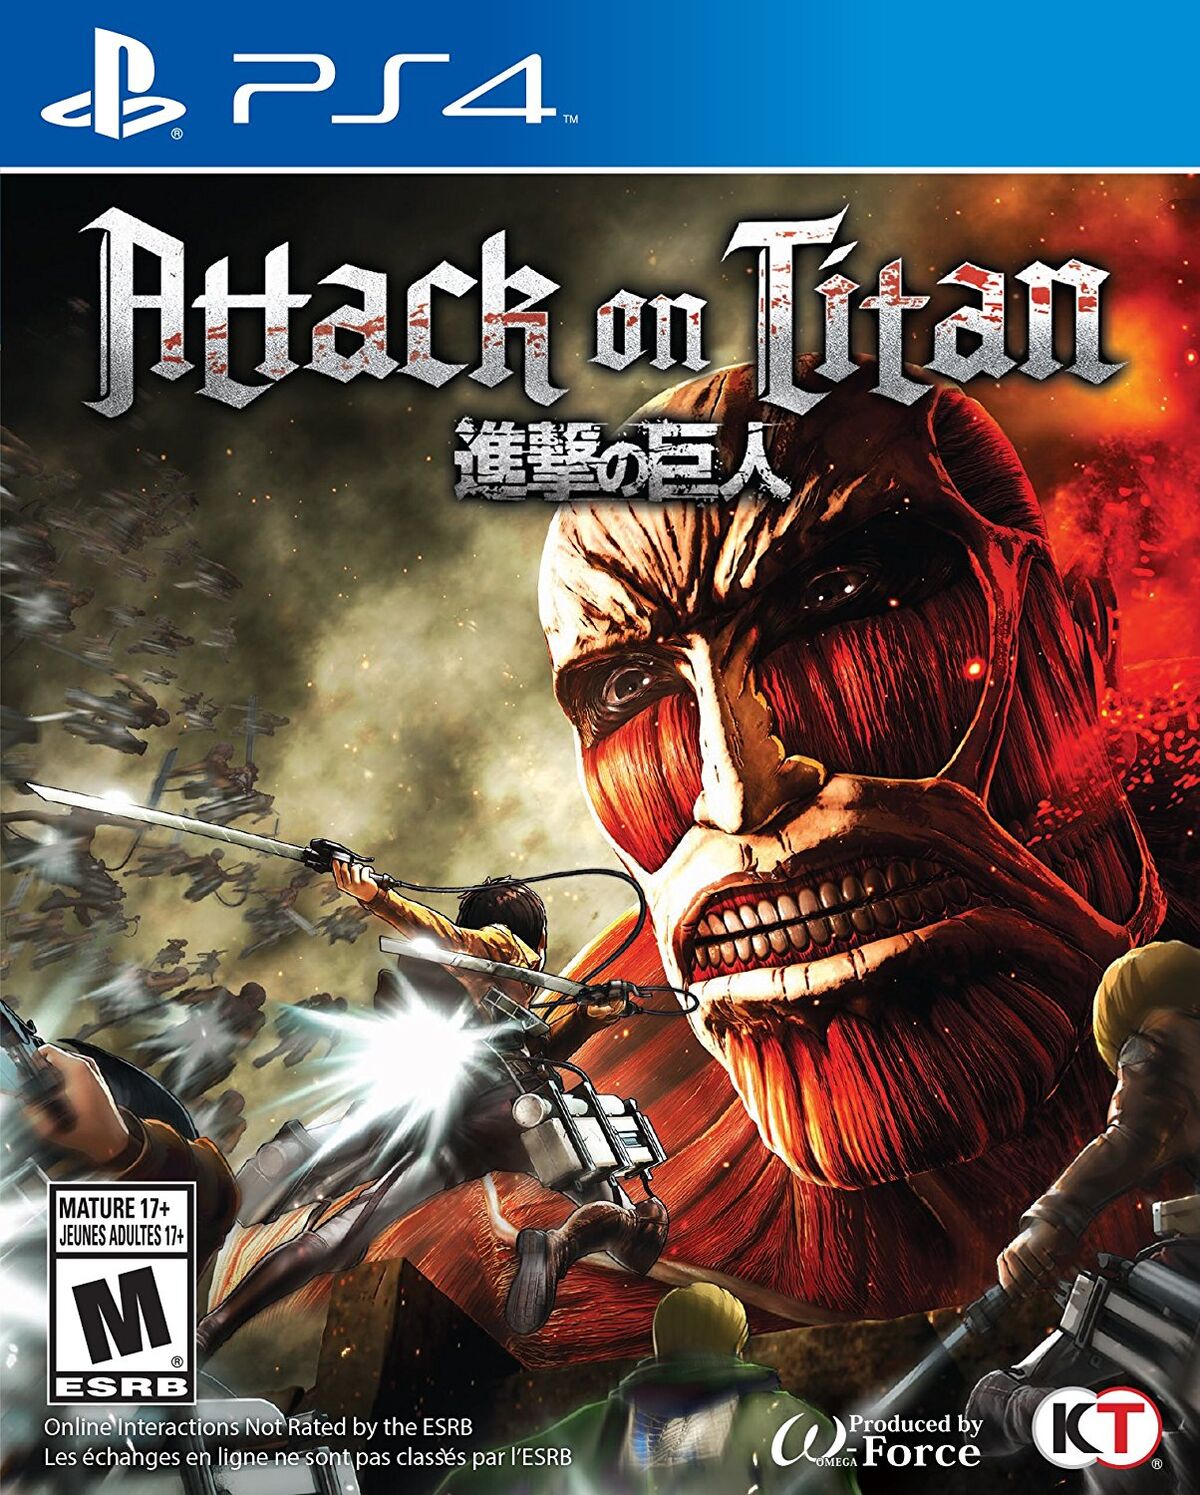 ATTACK on TITAN Game Trailer 3, Release Date, Levi Playable (PS4-PS3-Vita)  